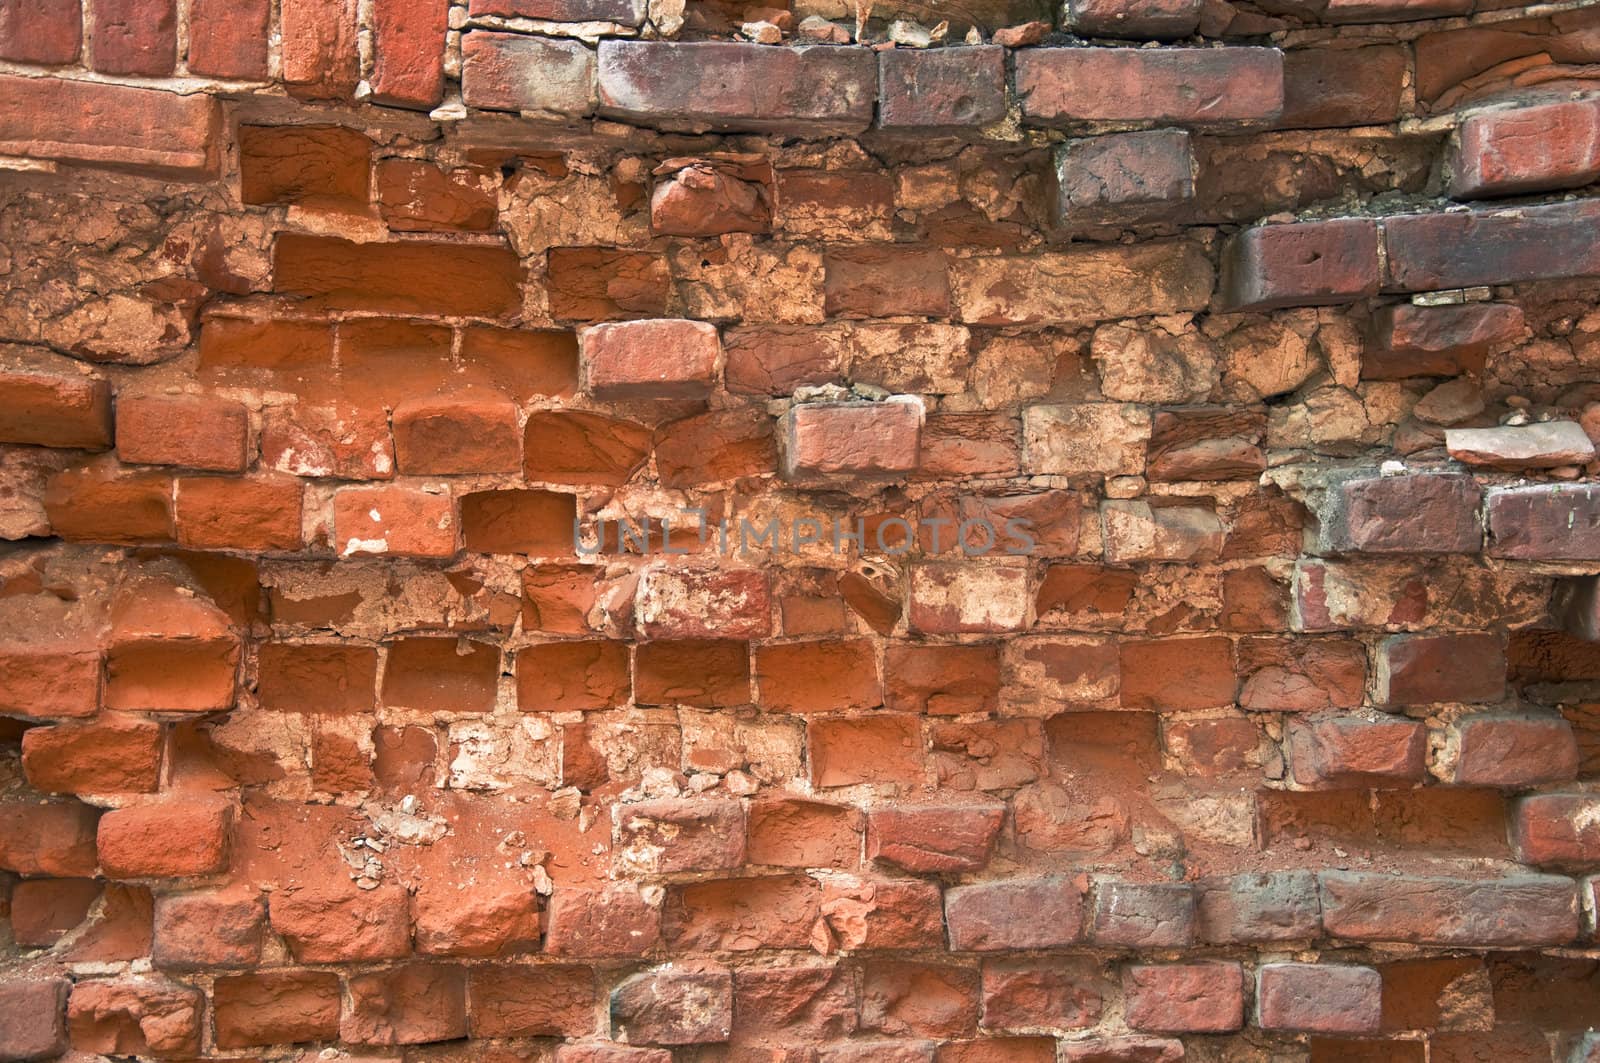 Old dilapidated brick wall. Uneven rows of masonry and pelted with bricks.